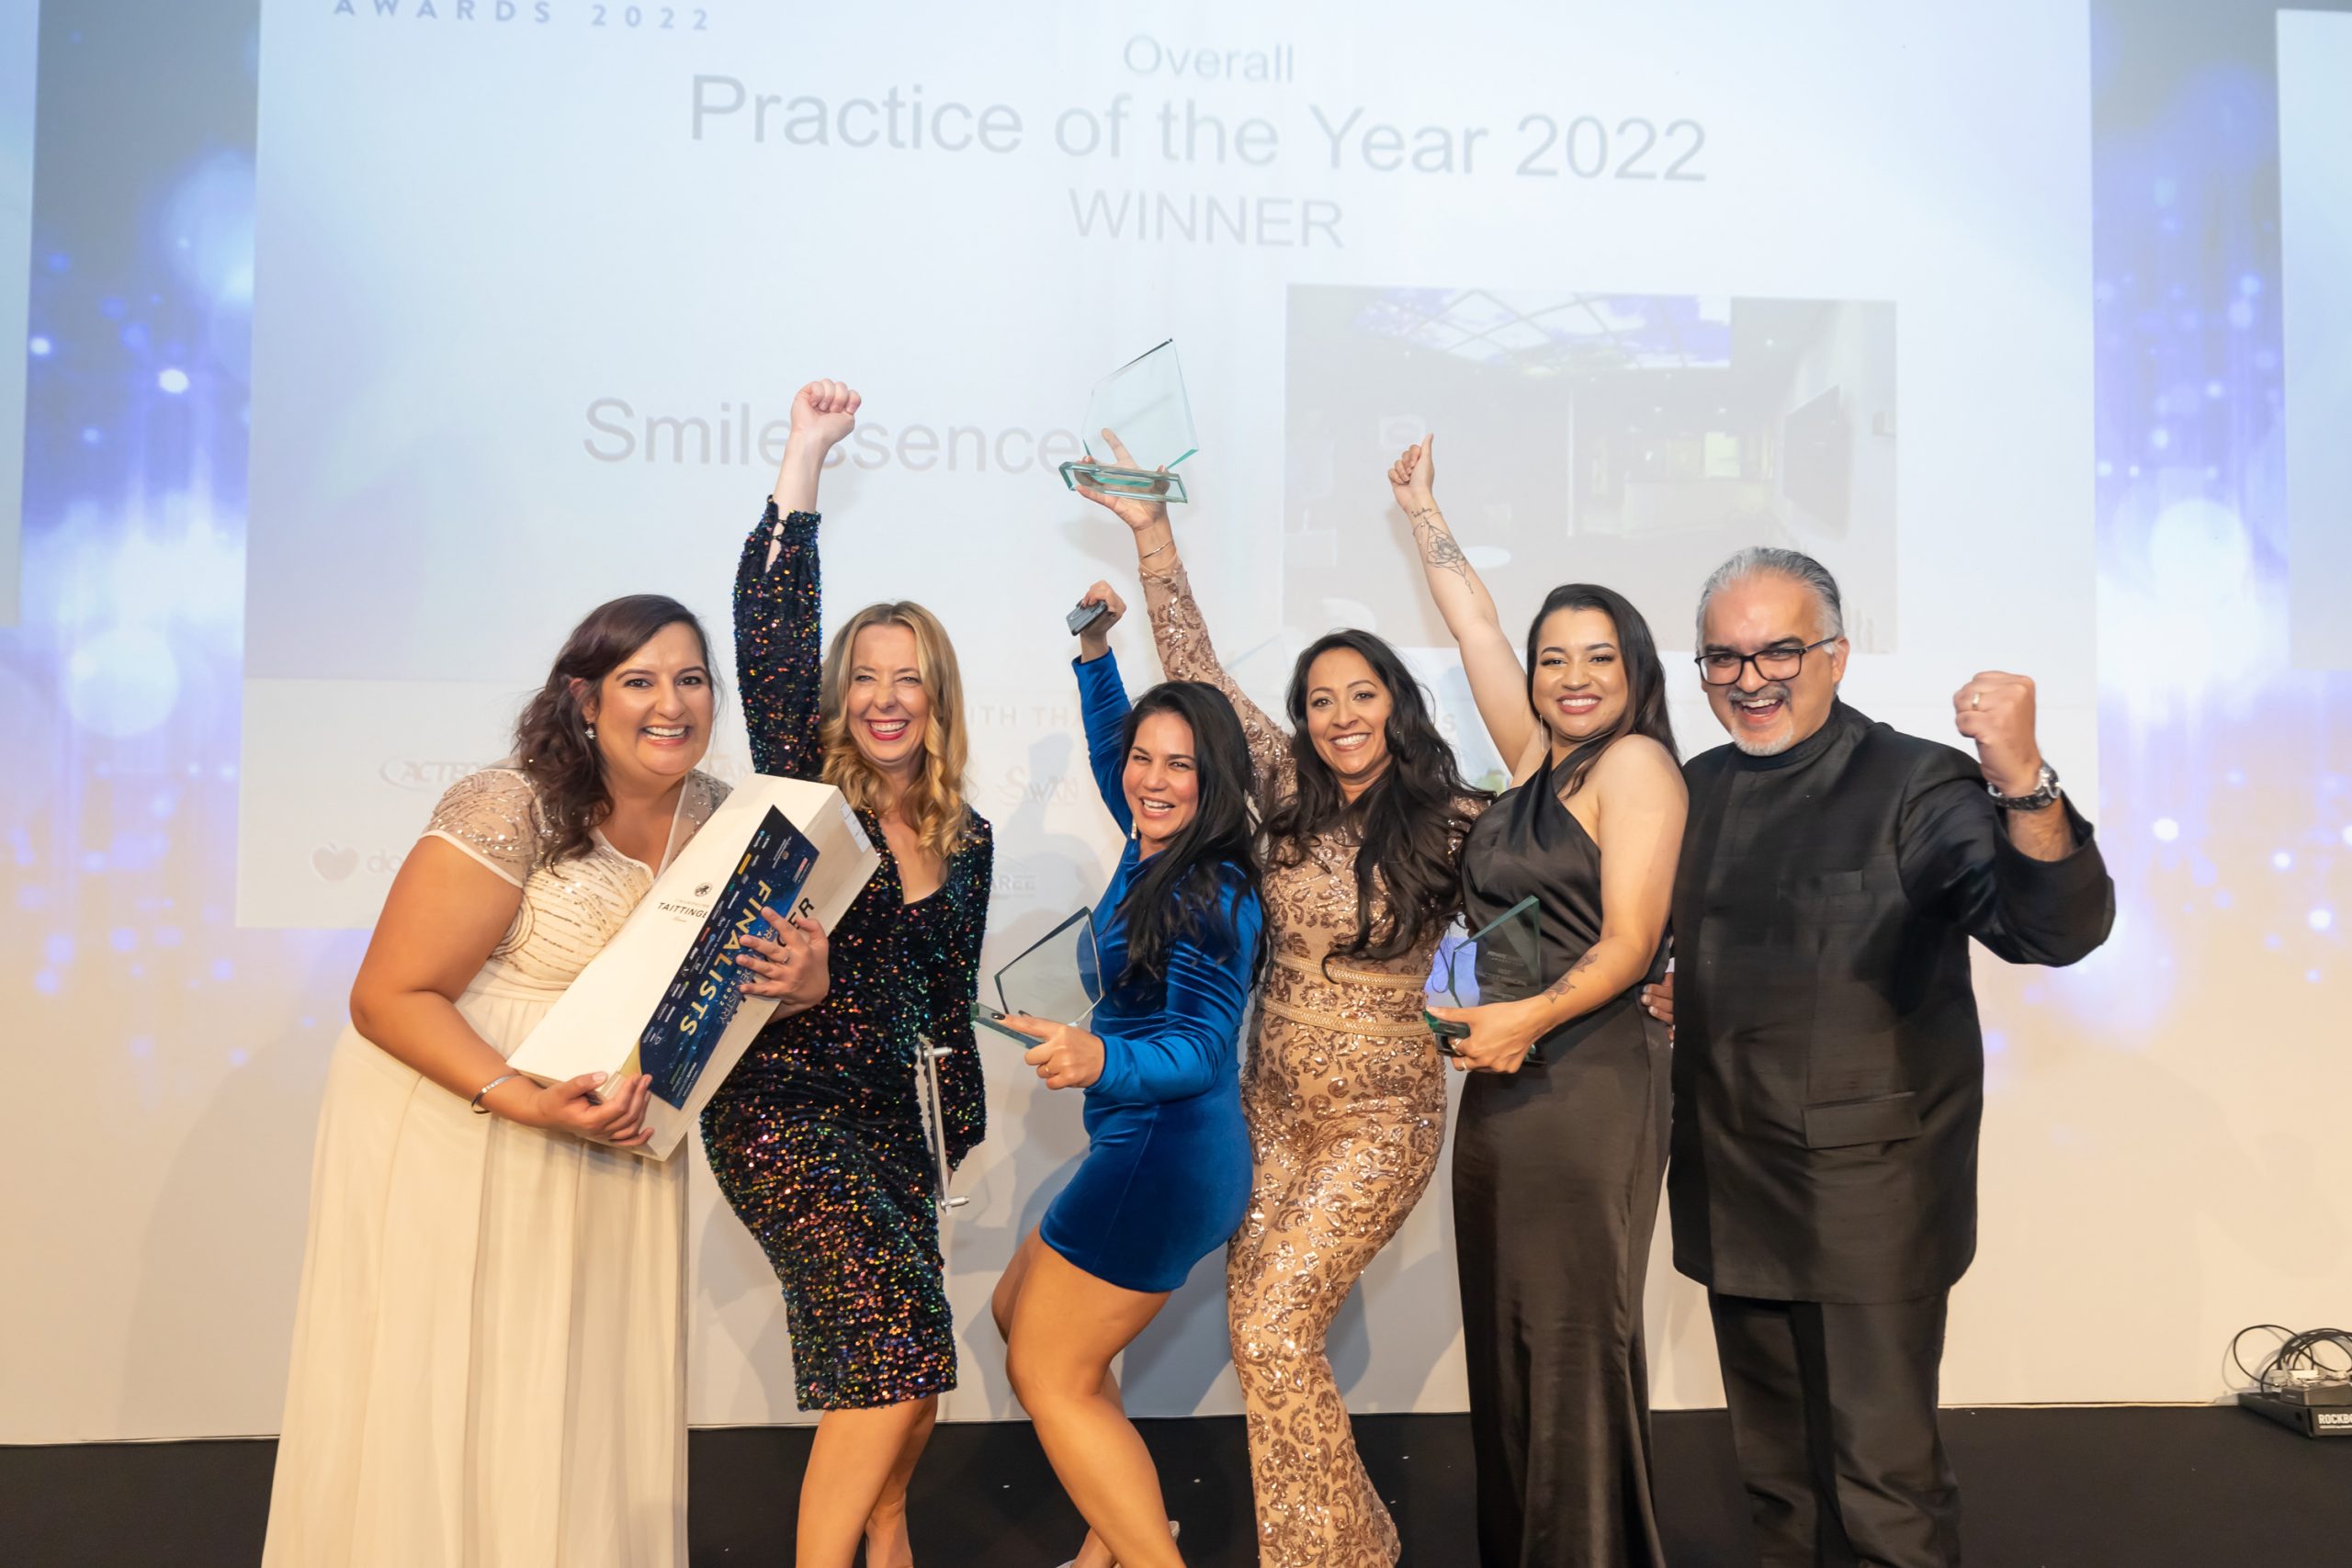 Last Friday we celebrated the very best in all fields in dentistry at the 2022 Private Dentistry Awards. Take a look at the winners…